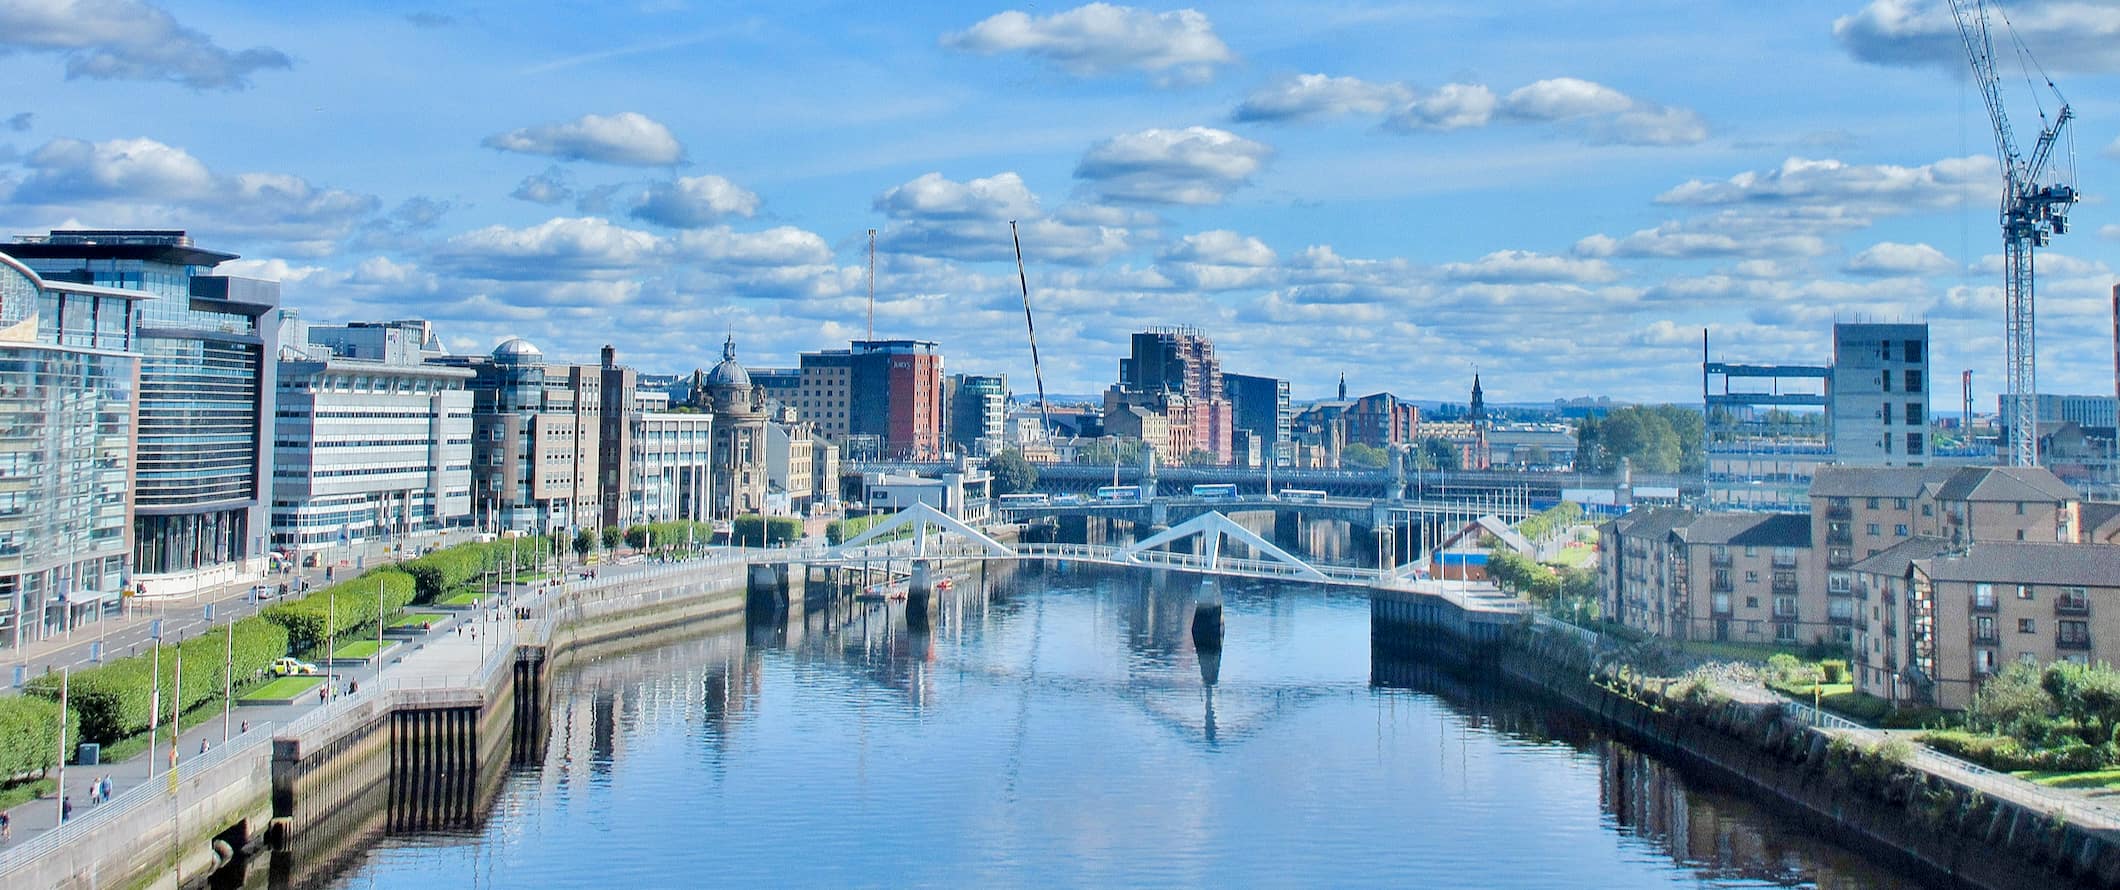 The skyline of Glasgow, Scotland divided by the river